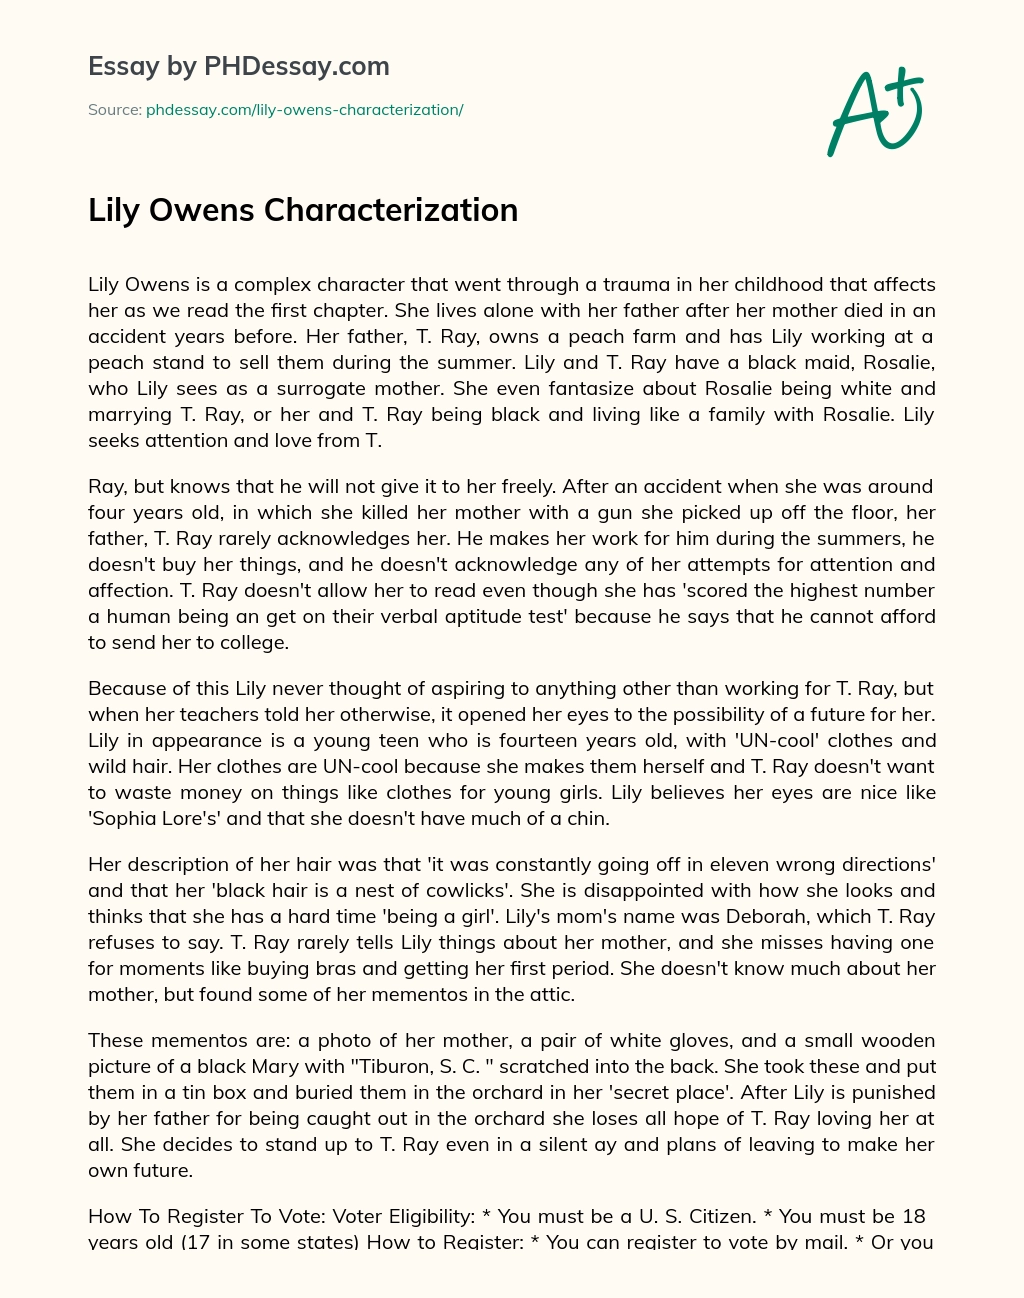 Lily Owens Characterization essay